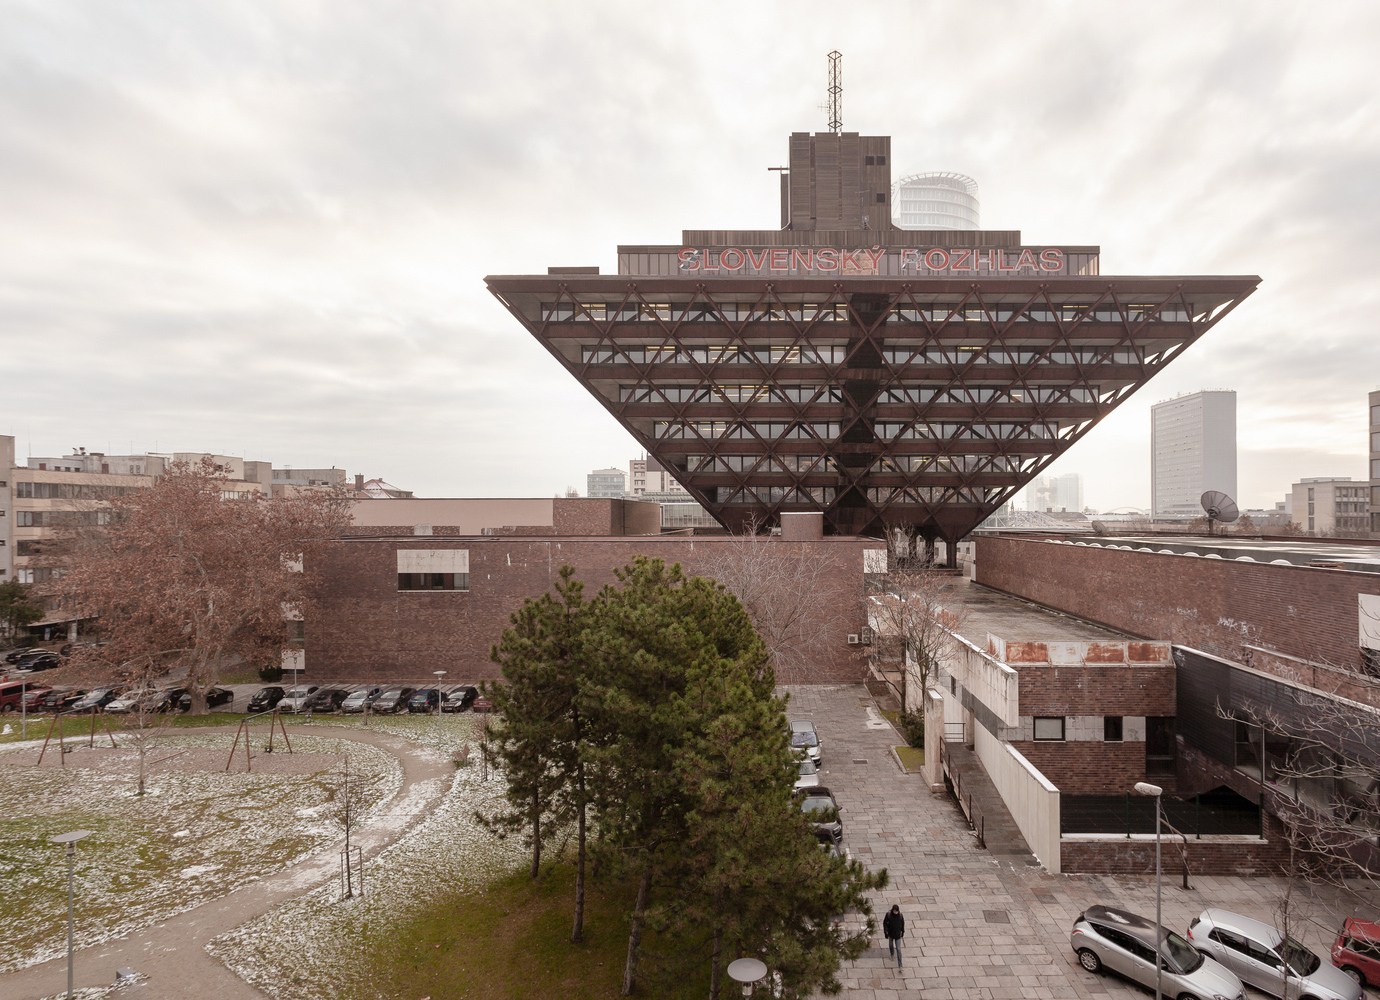 How Slovakia’s Soviet ties led to a unique form of sci-fi architecture